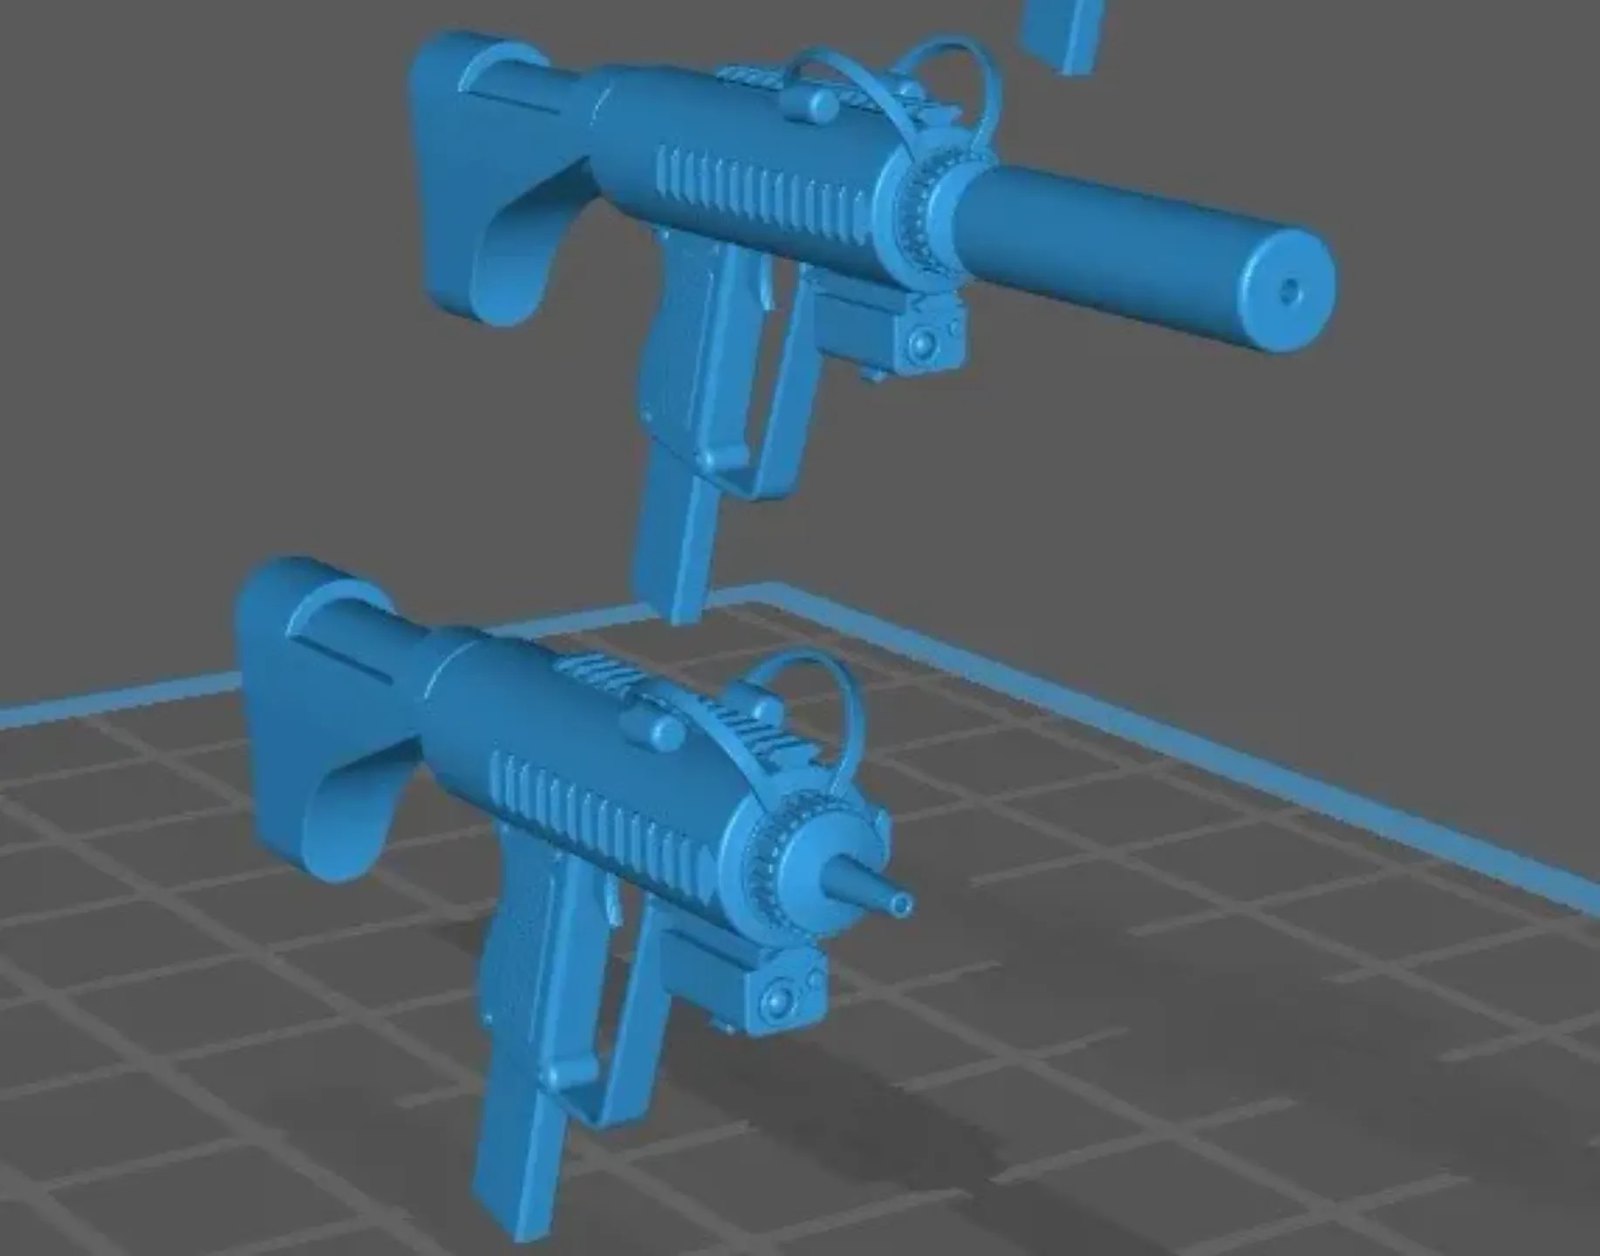 3D printable Star Wars parts and weapons for 1:6 figures (New models added, more updates in future) - Page 3 52702976433_4c86769bf3_h